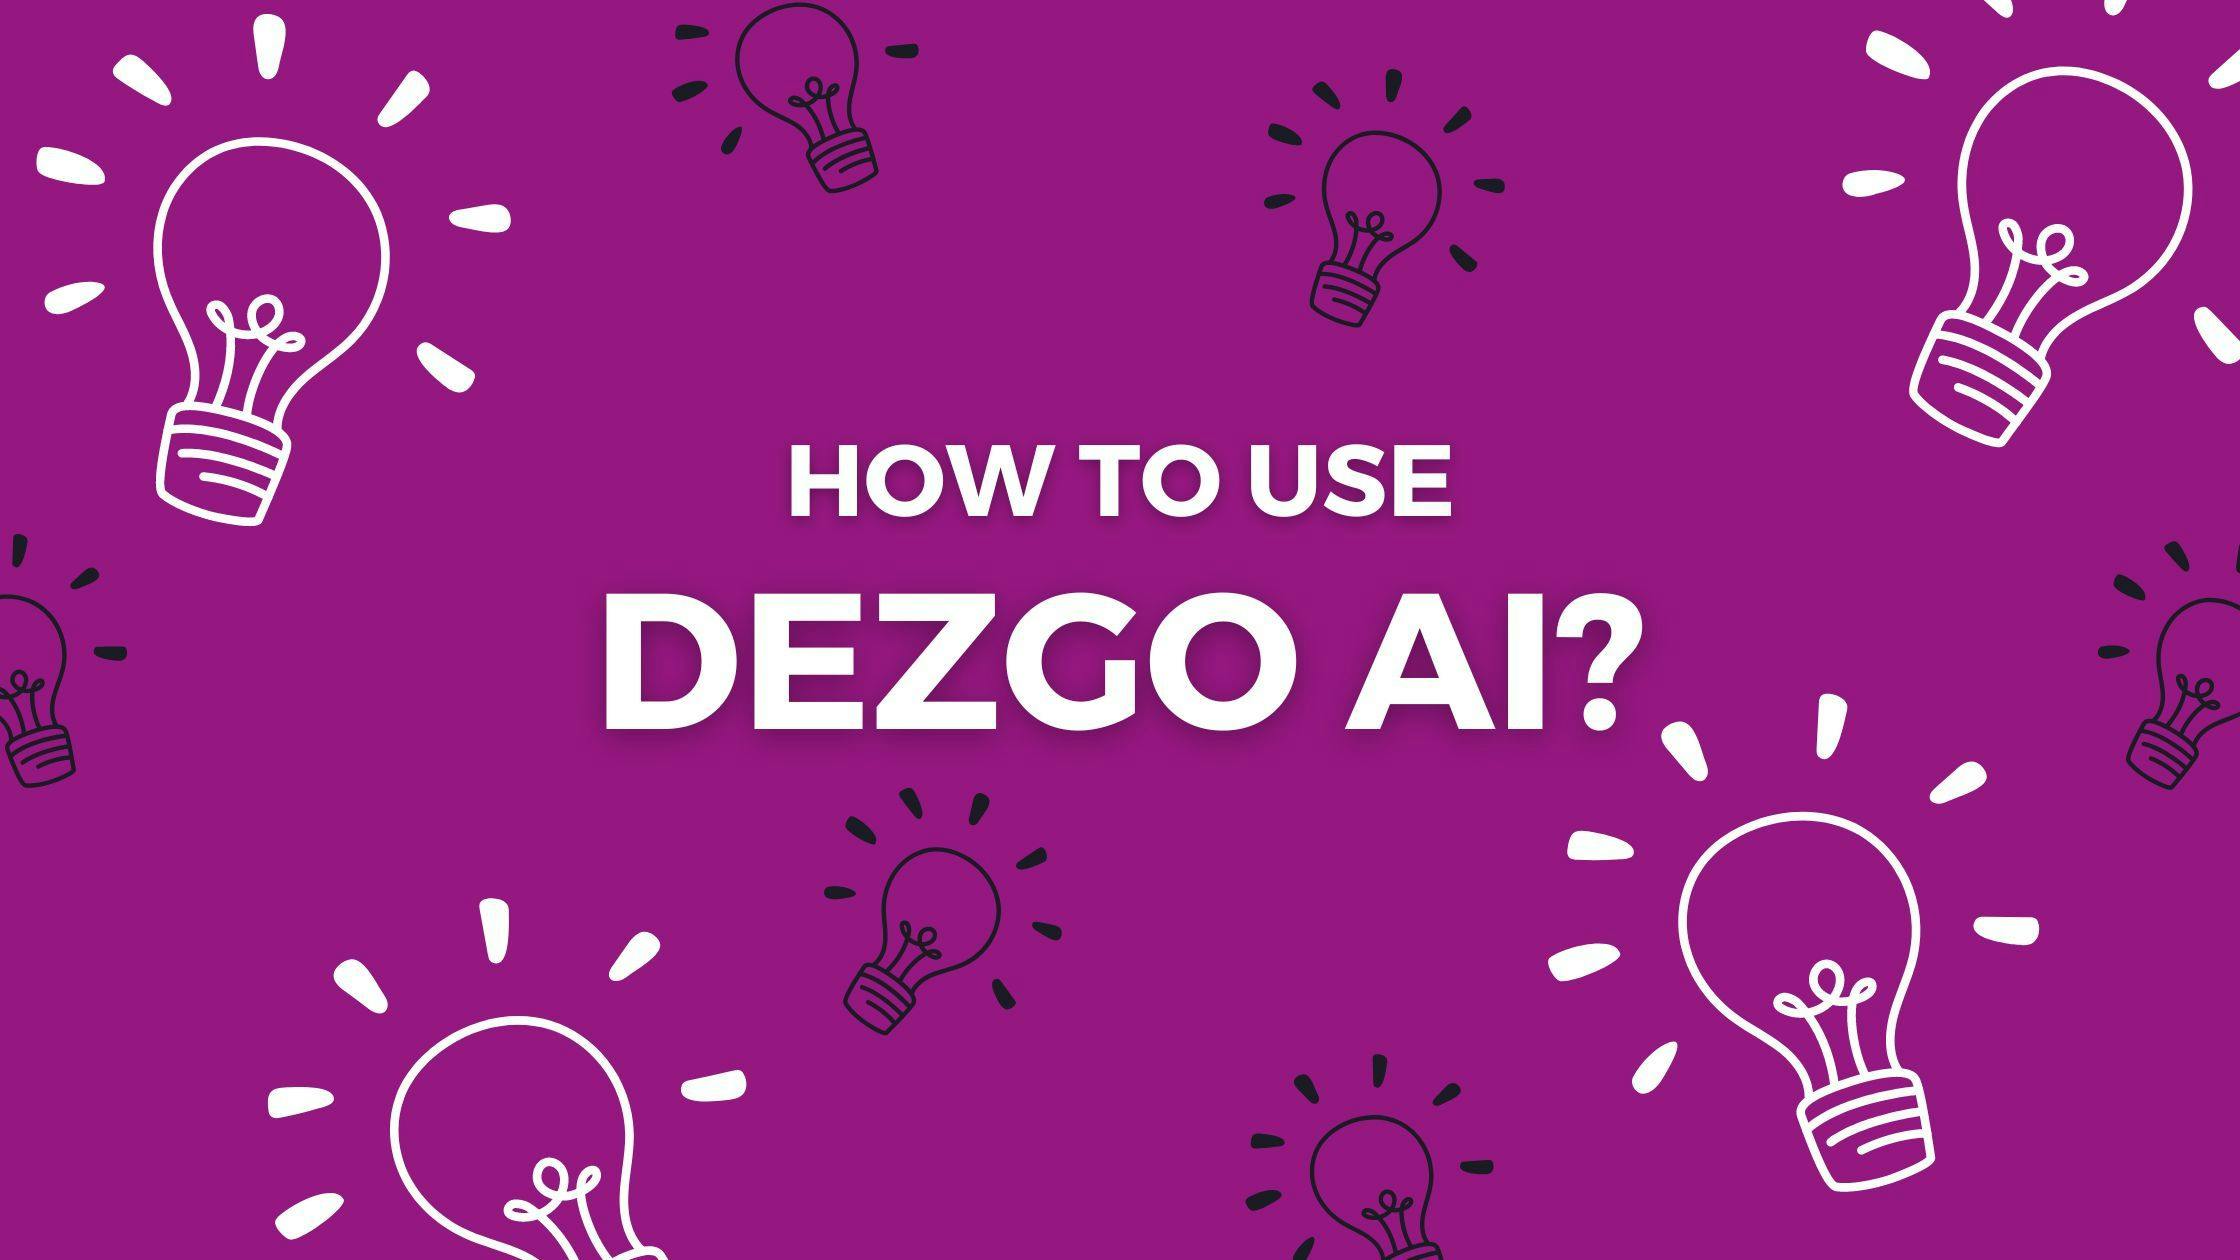 Cover Image for How to Use Dezgo AI?